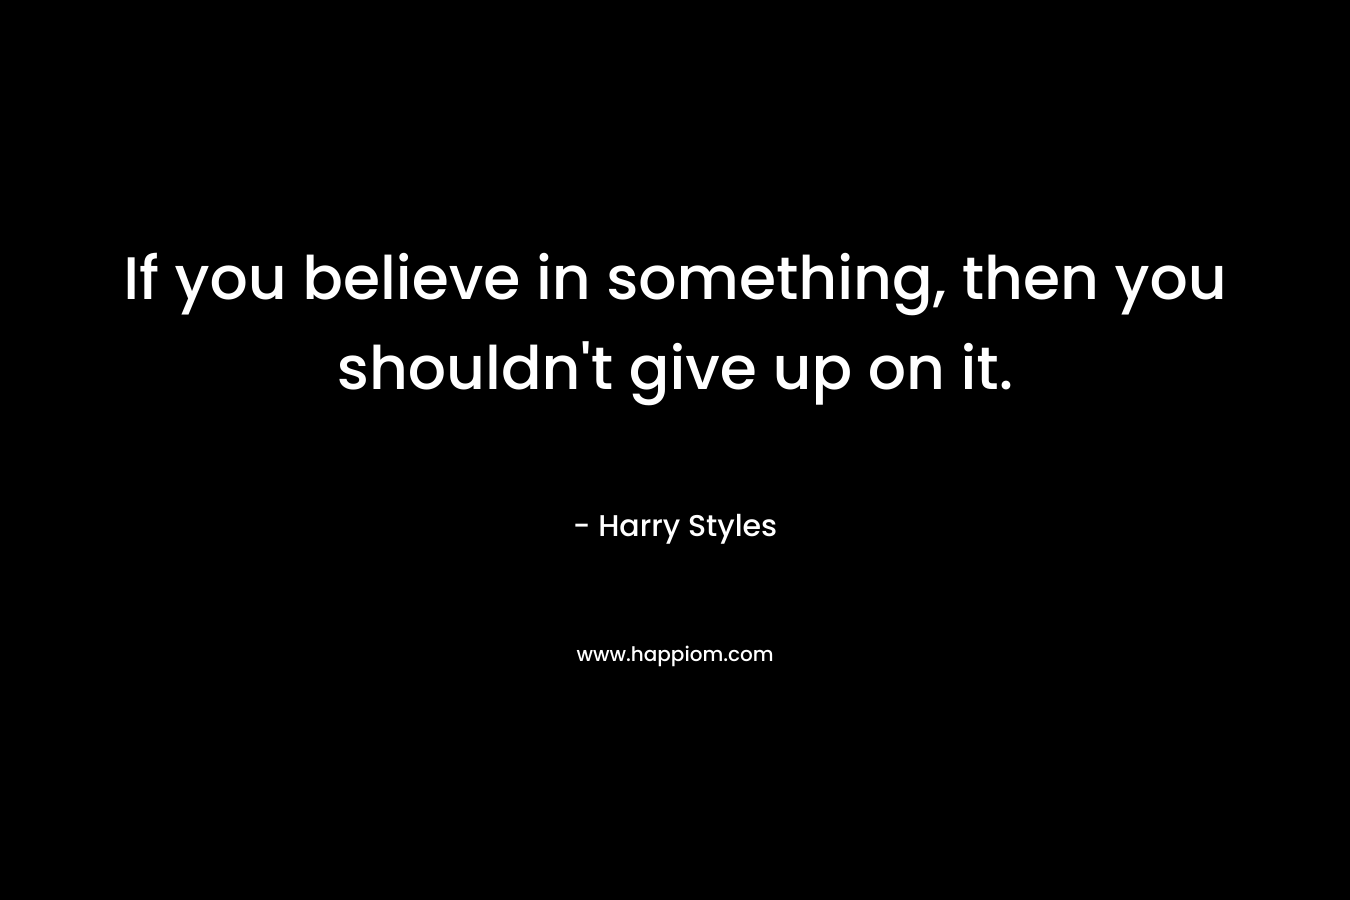 If you believe in something, then you shouldn’t give up on it. – Harry Styles